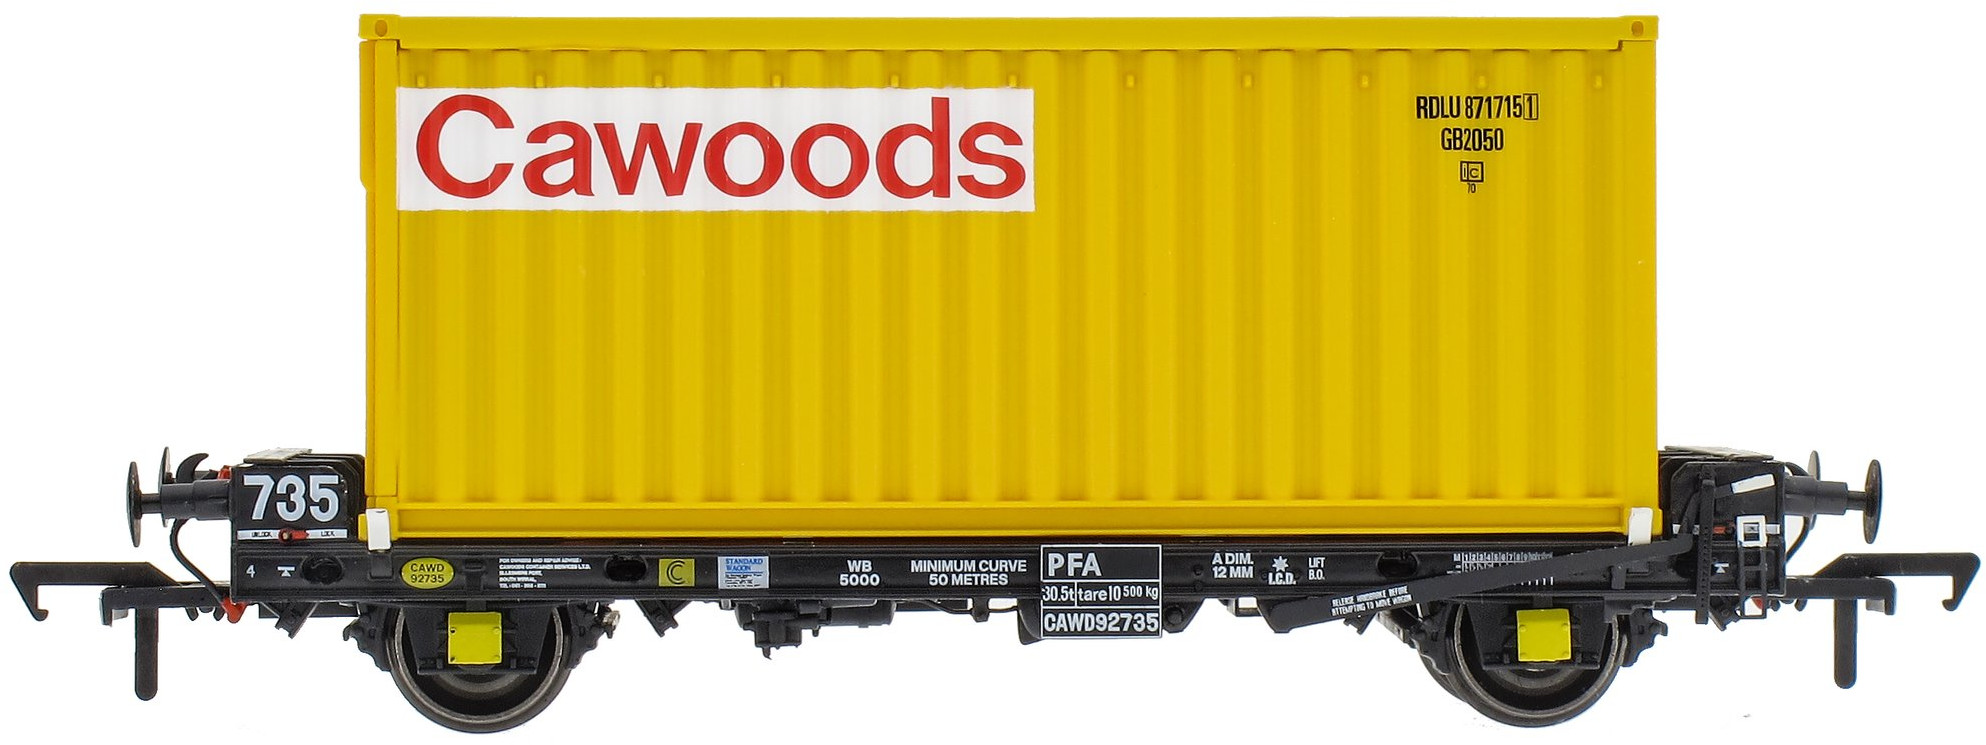 Accurascale ACC2087CWDS Flat Cawoods CAWD92735 Image